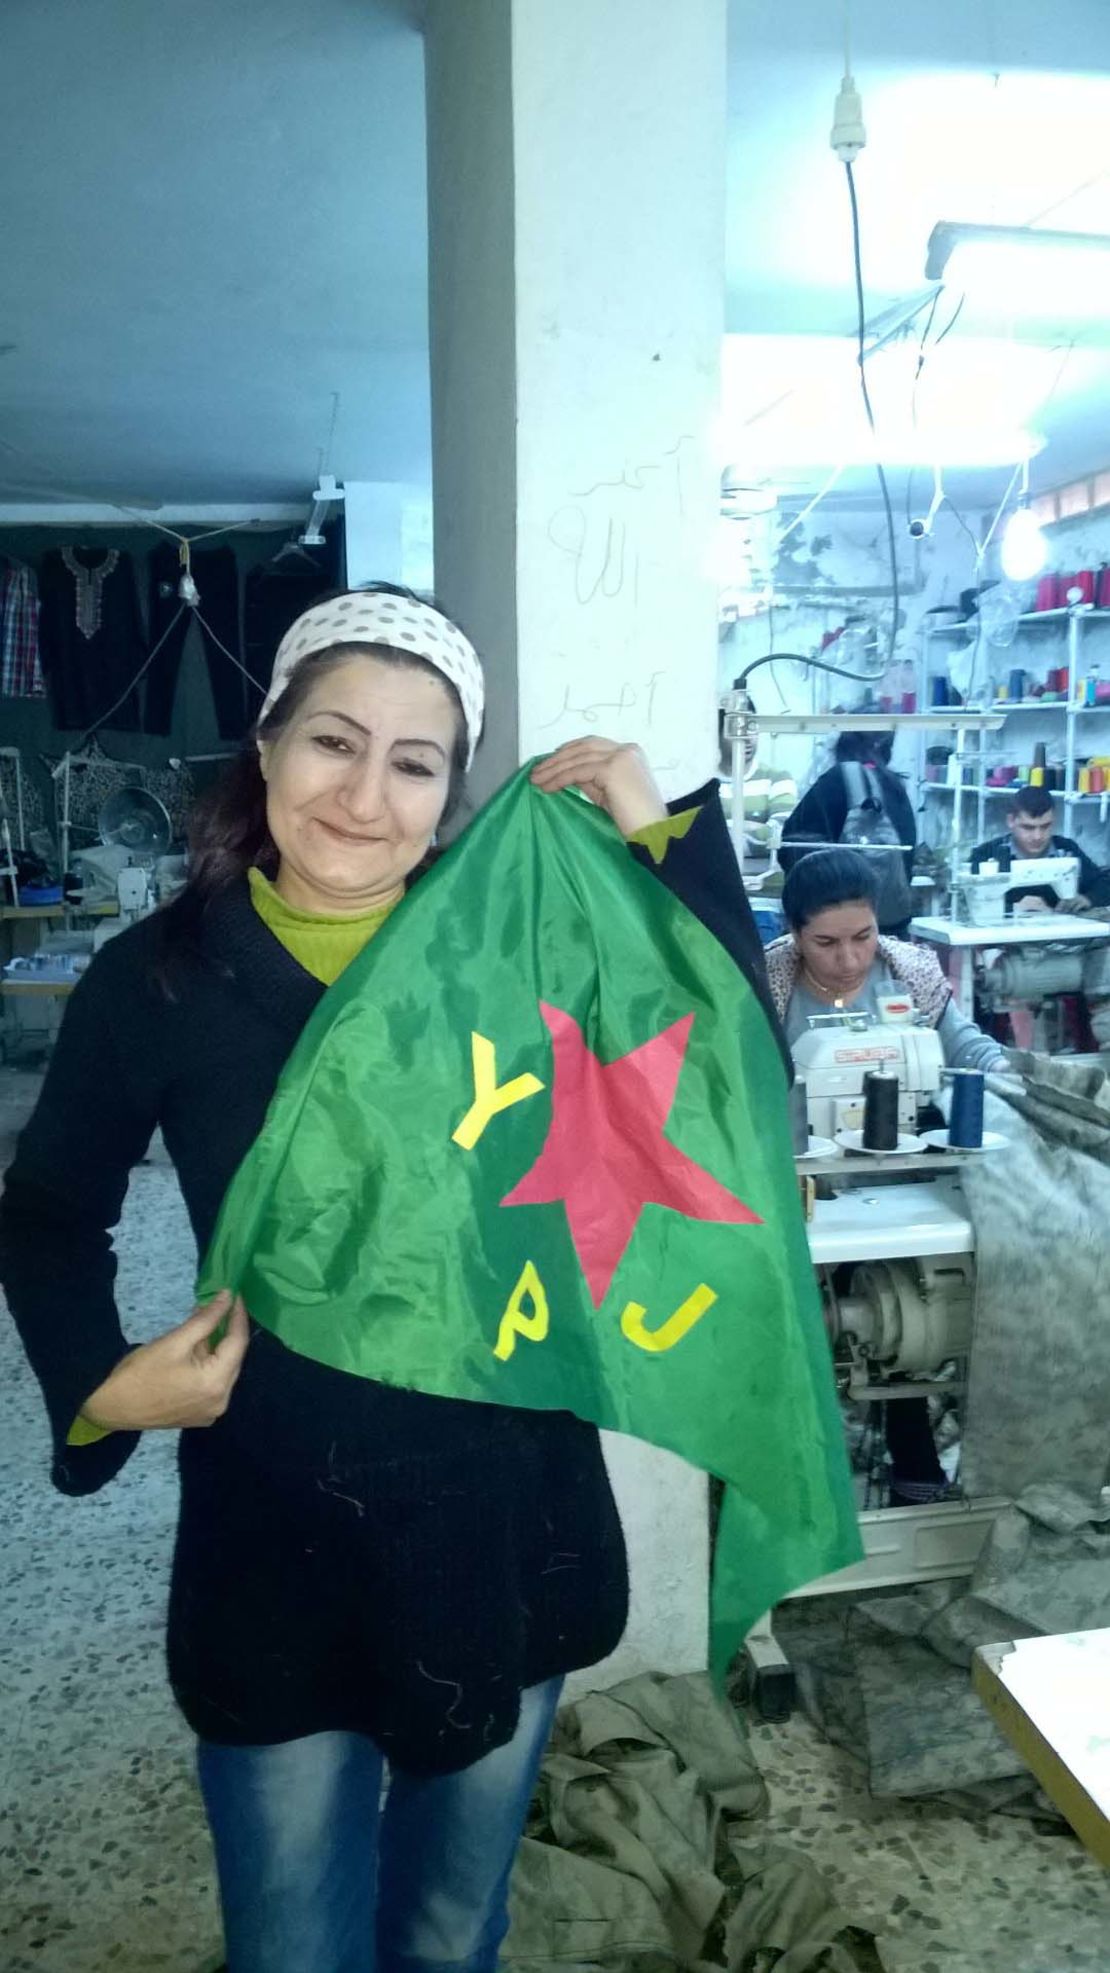 The YPJ flag belongs to the women's defence units and was 'modelled' by a worker in a sewing collective.